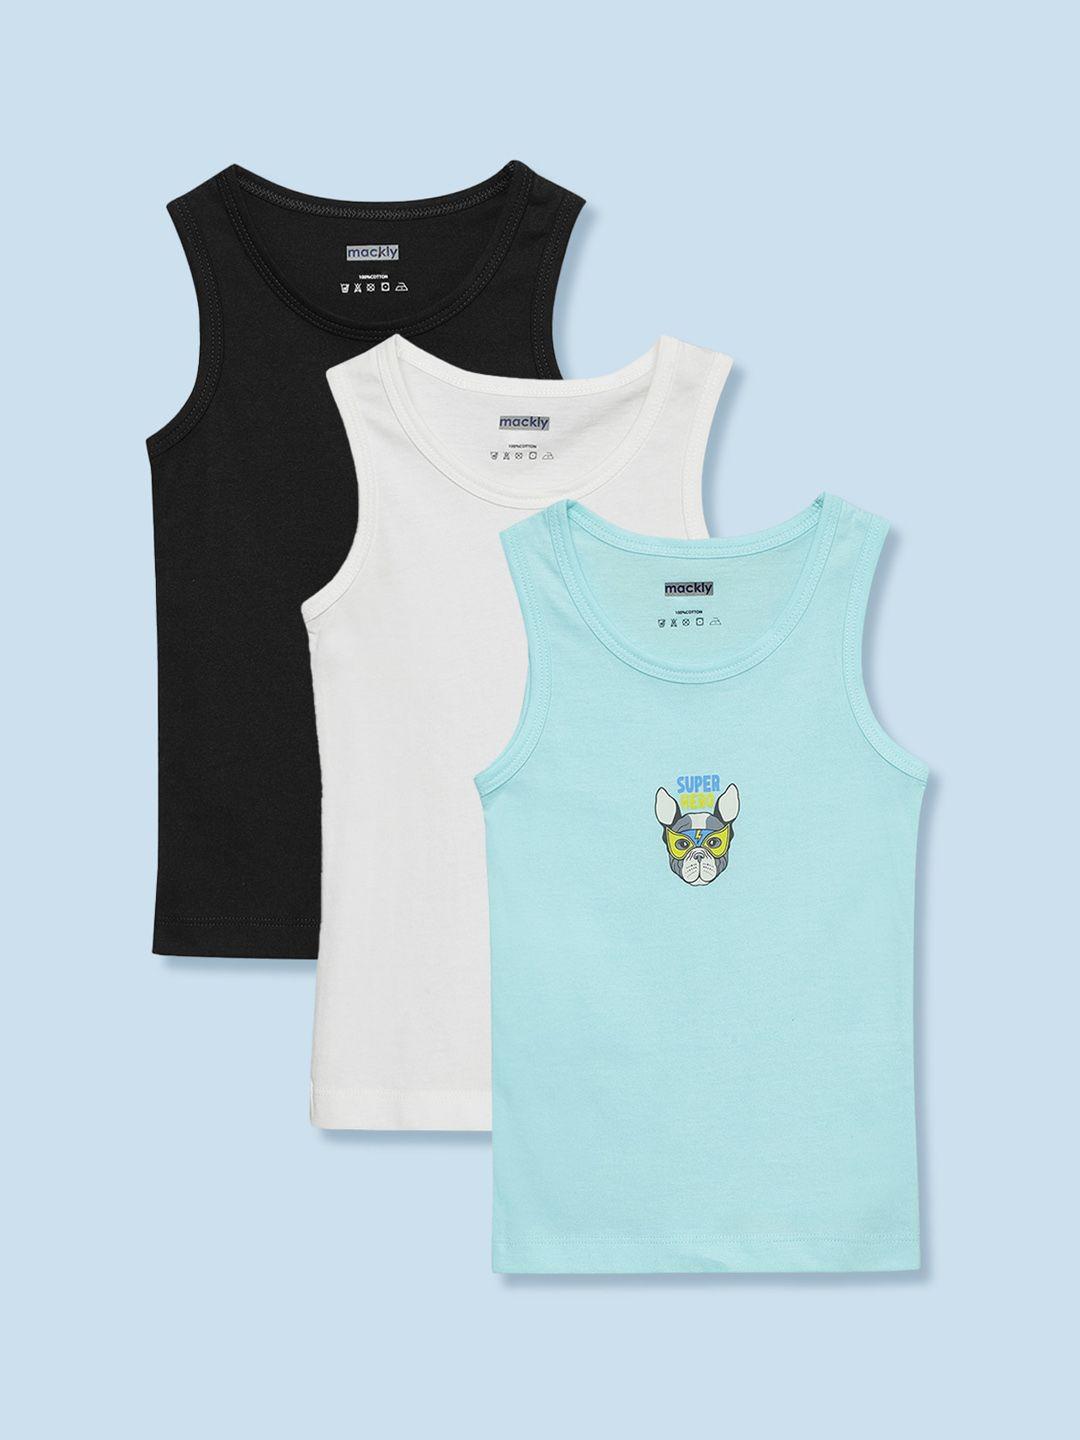 mackly boys pack of 3 pure cotton innerwear vests